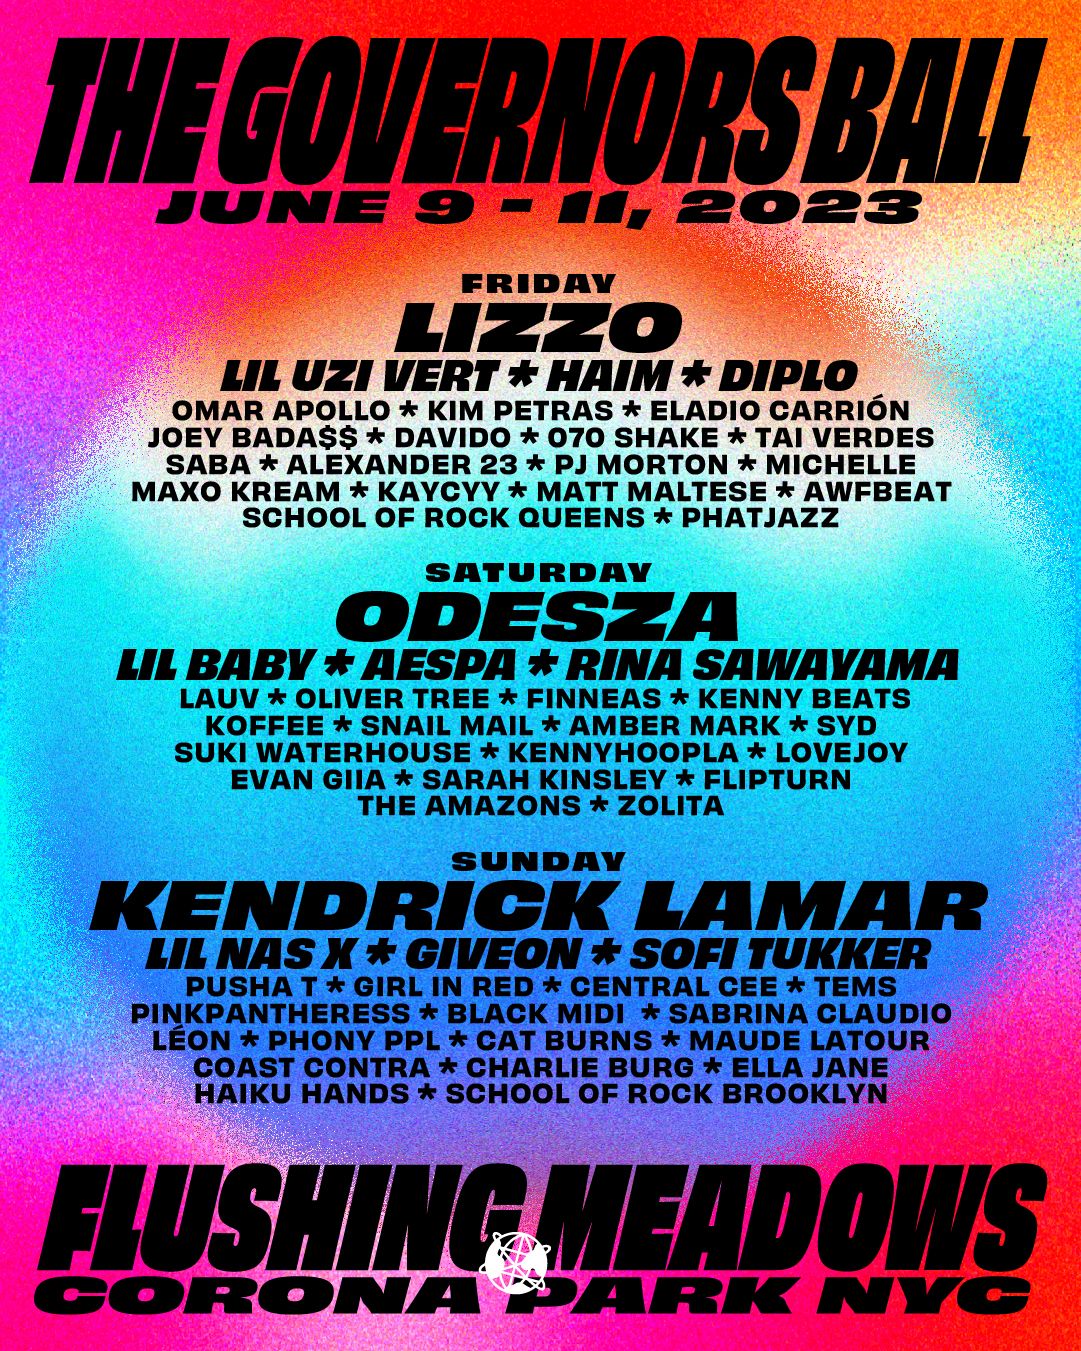 Governors Ball Music Festival - Sunday (Concert)